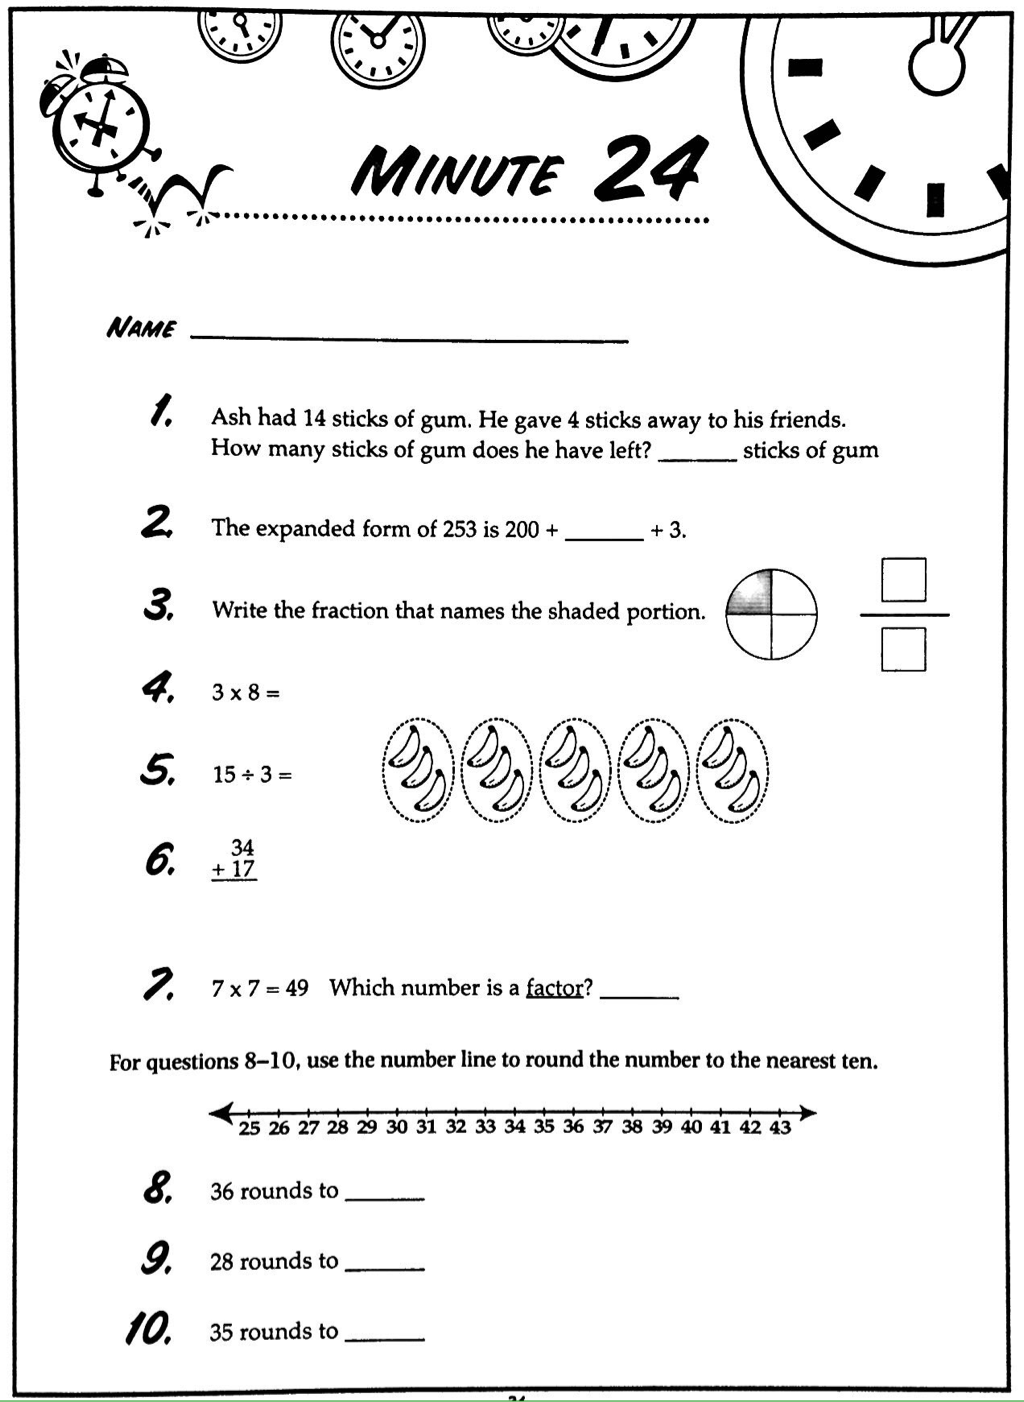 free-minute-math-worksheets